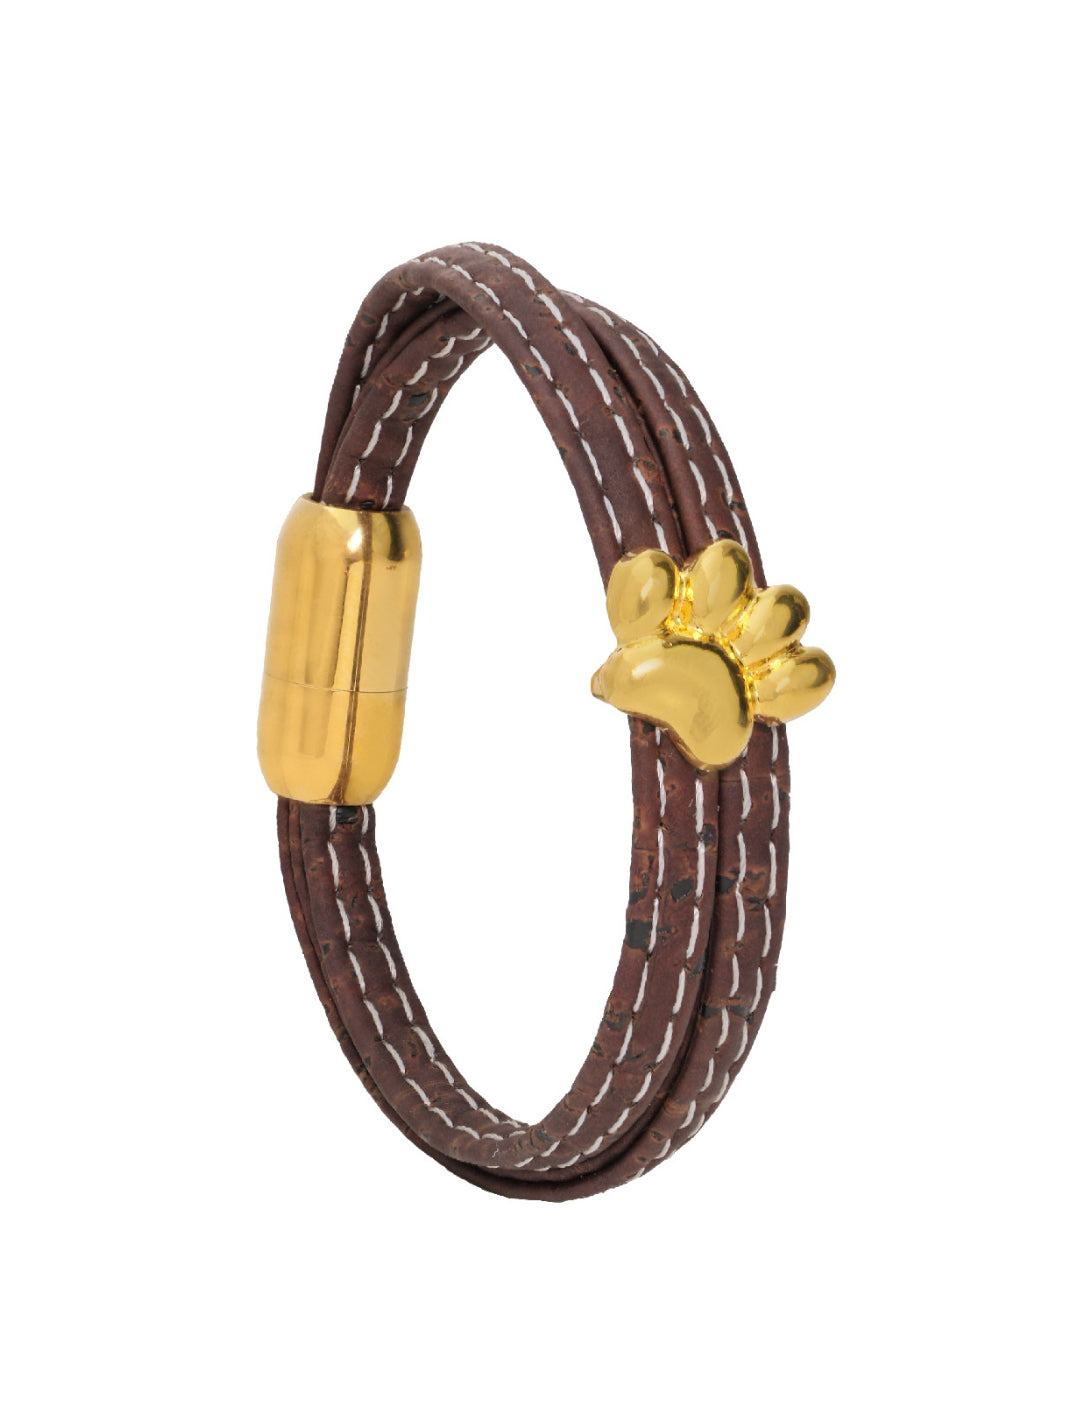 Introducing the FOReT Pugmark Cork Bracelet: sustainable elegance. Crafted from eco-friendly cork, adorned with delicate embroidery, and finished with an 18K gold-plated stainless-steel lock. Effortless wear with a magnetic clasp. A statement of style and sustainability.